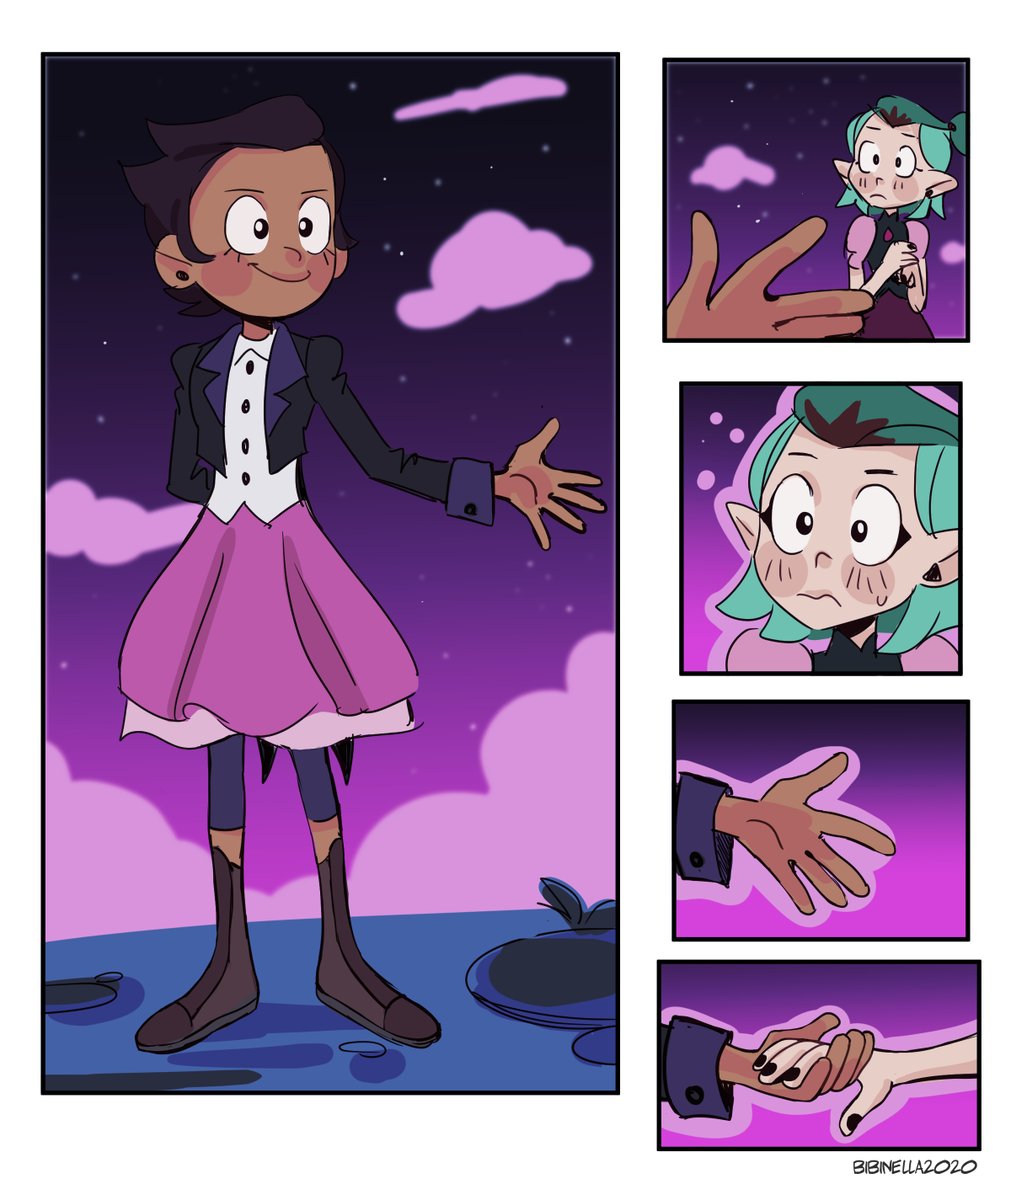 lil grom comic? hell yeah #lumity #TheOwlHouse #toh #TOHSPOILERS 